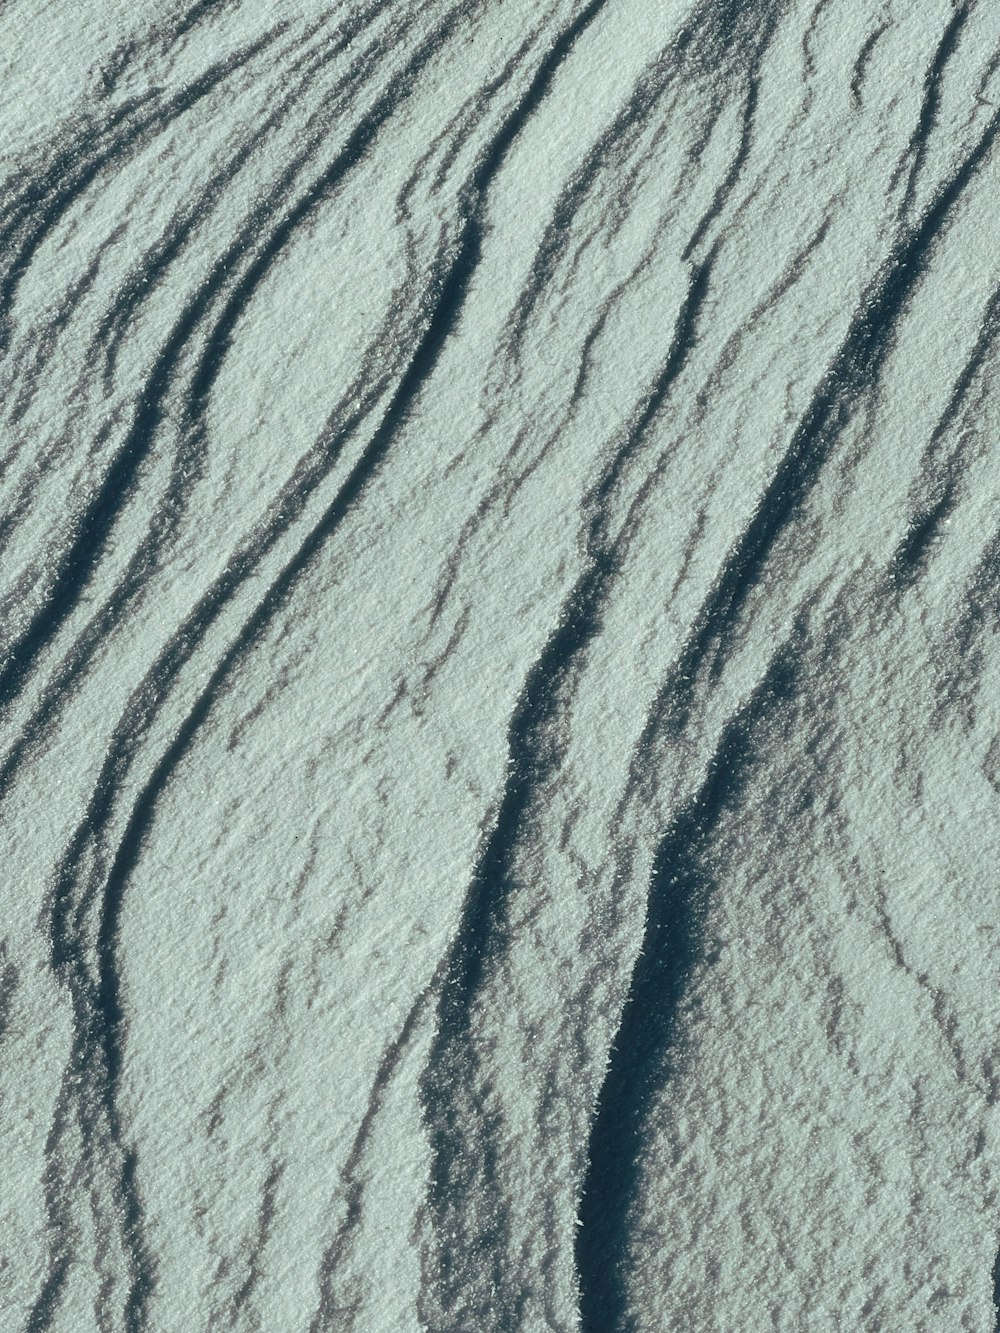 a snow covered ground with lines in the snow